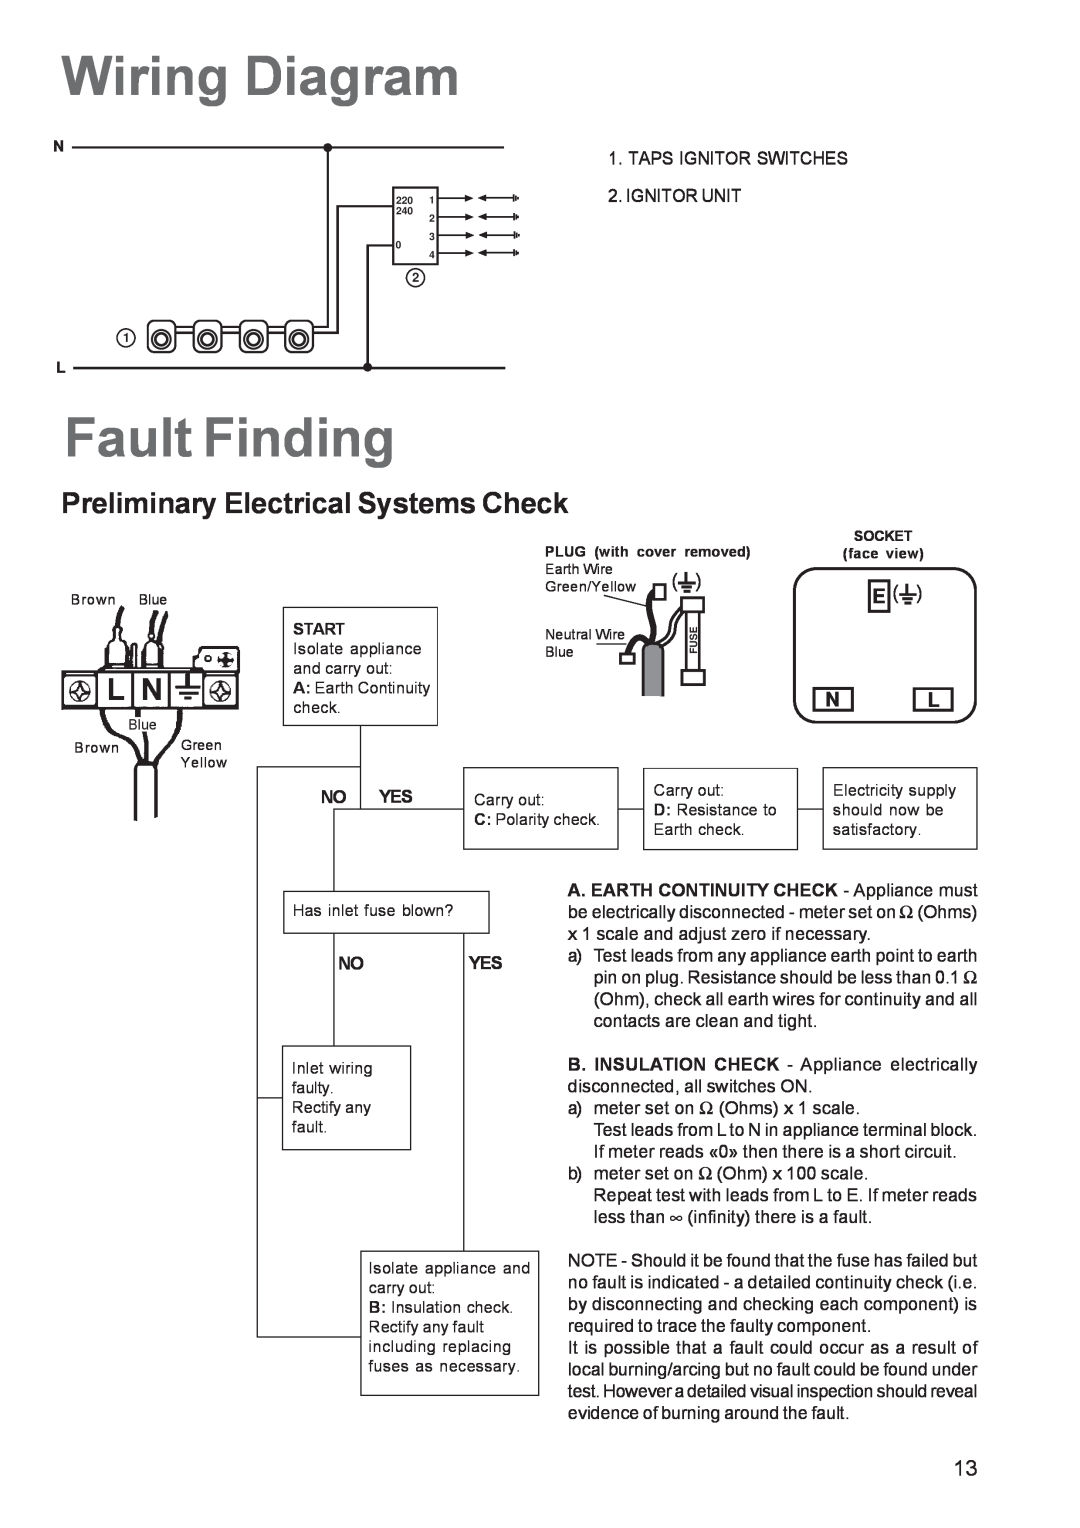 Electrolux EHG 6762 manual Wiring Diagram, Fault Finding, Preliminary Electrical Systems Check 